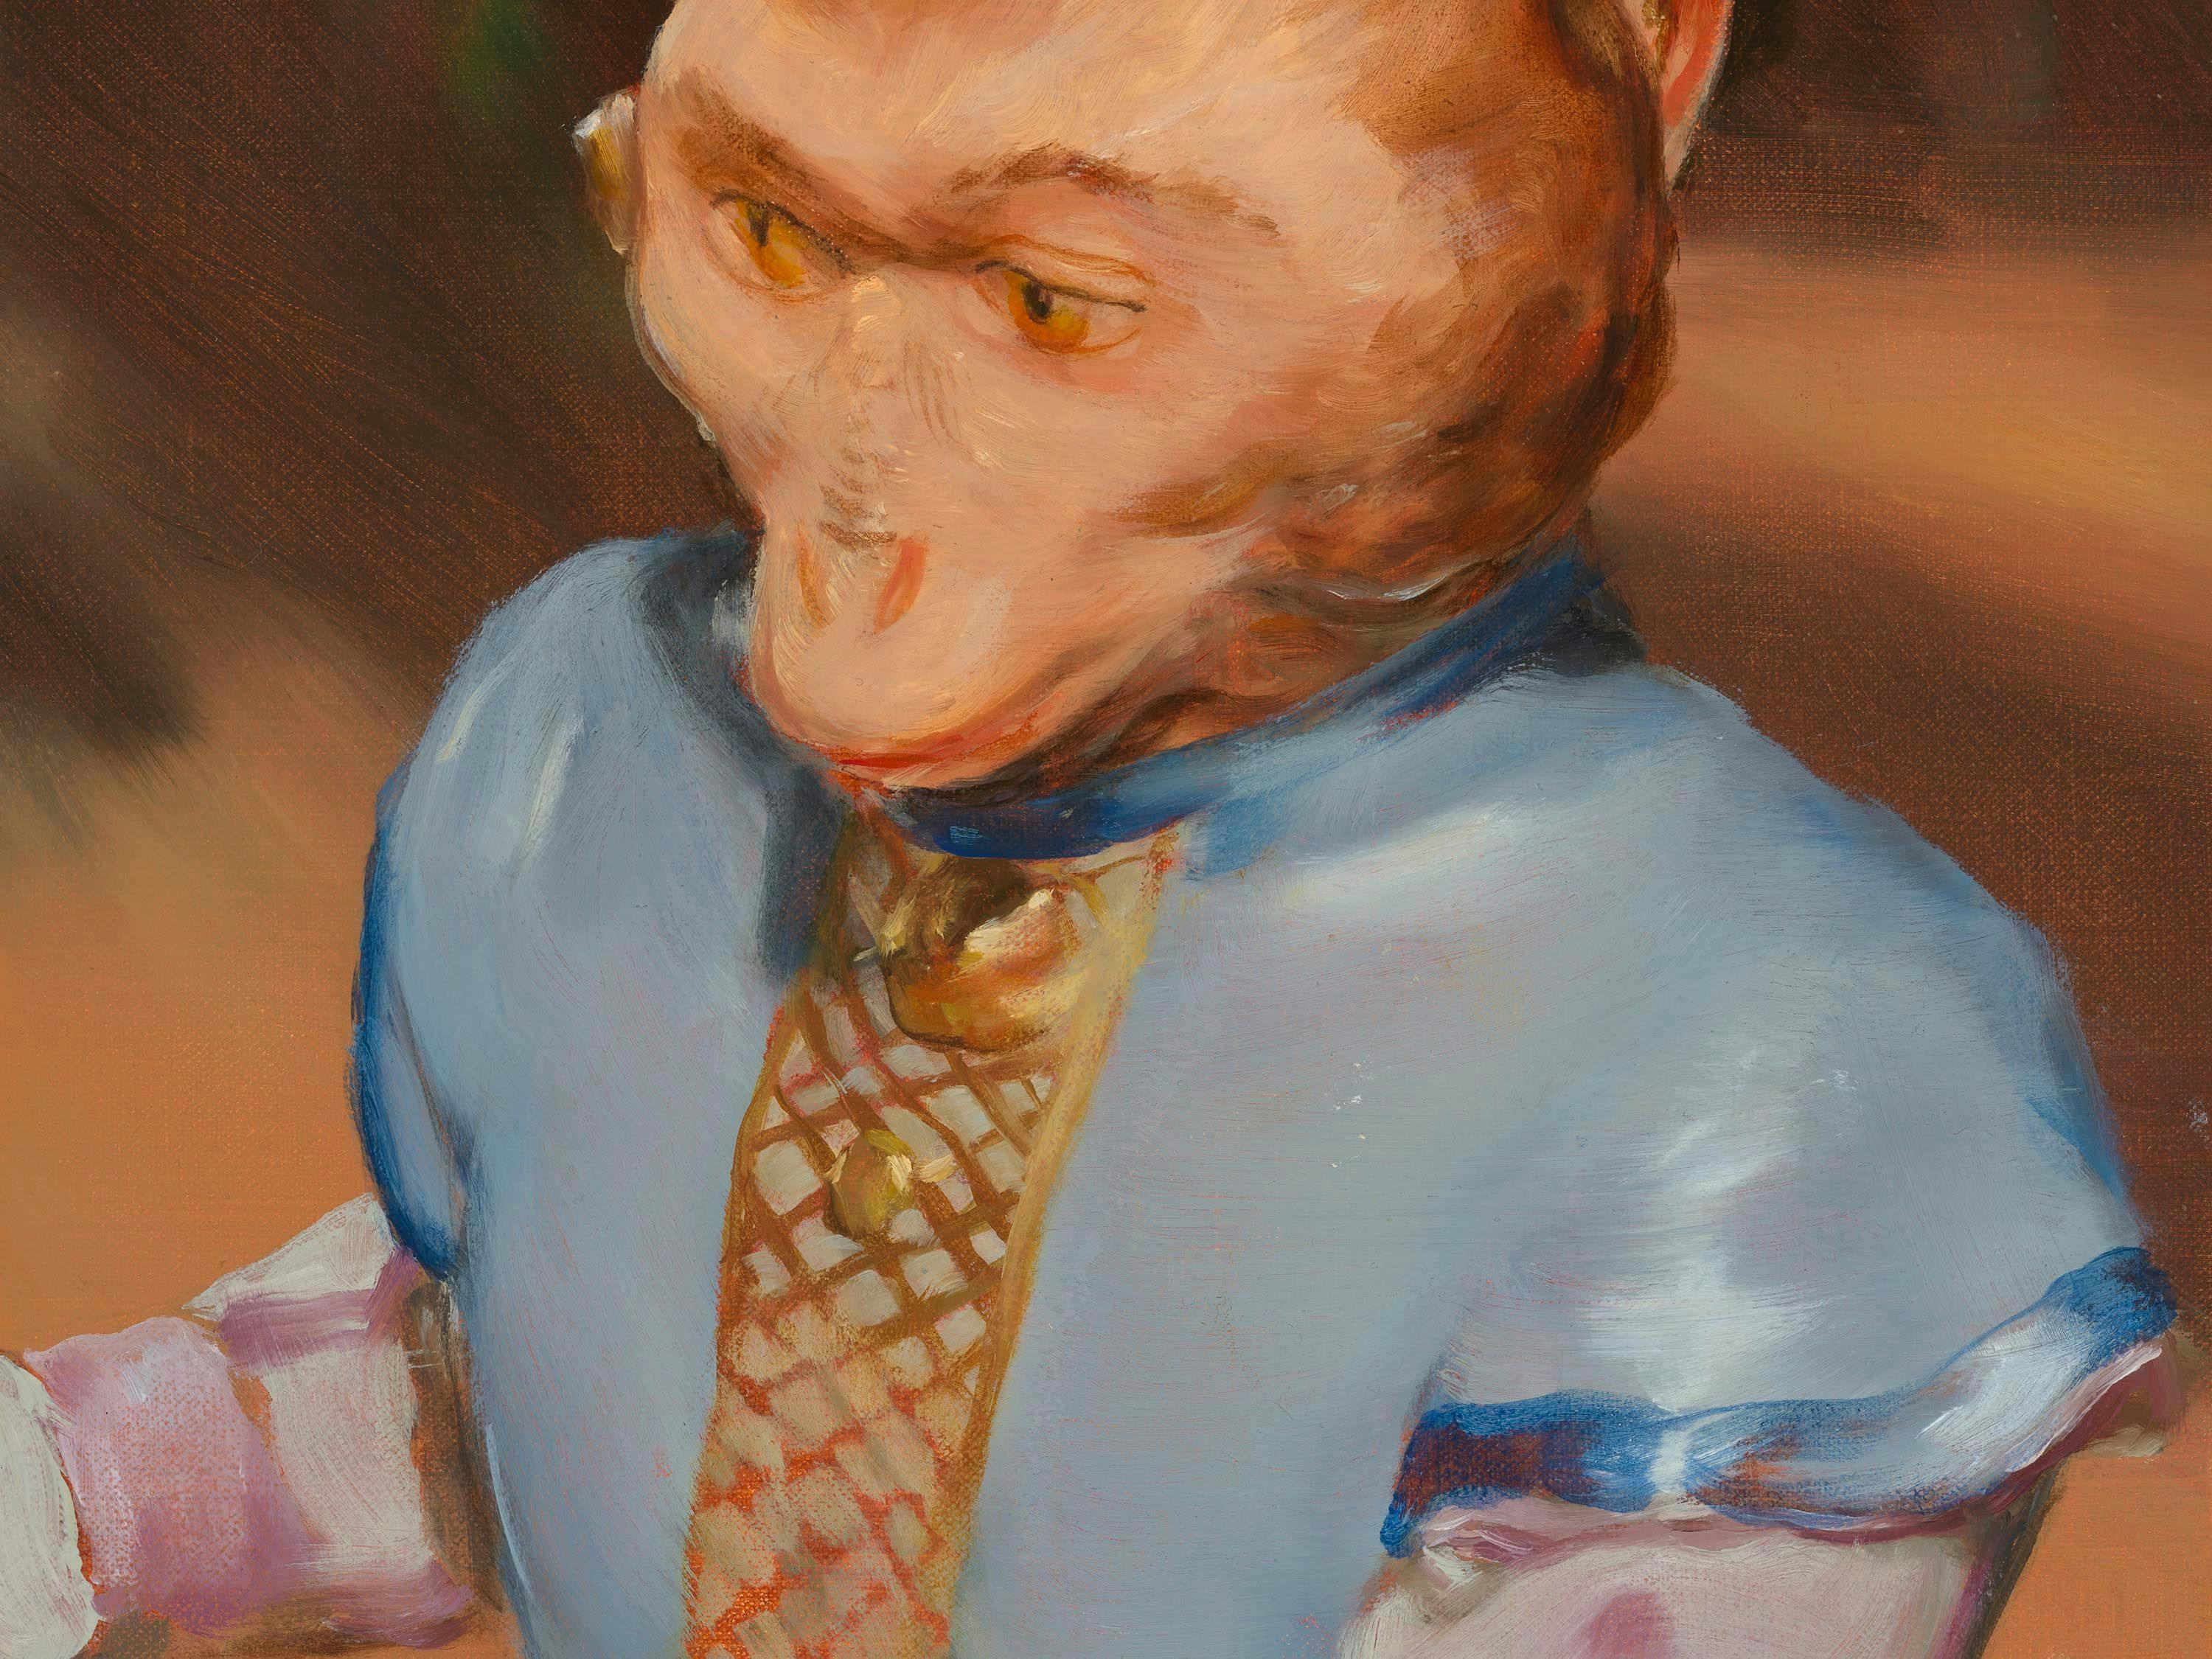 A detail from a painting by Michaël Borremans, titled The Monkey IV, dated 2023.